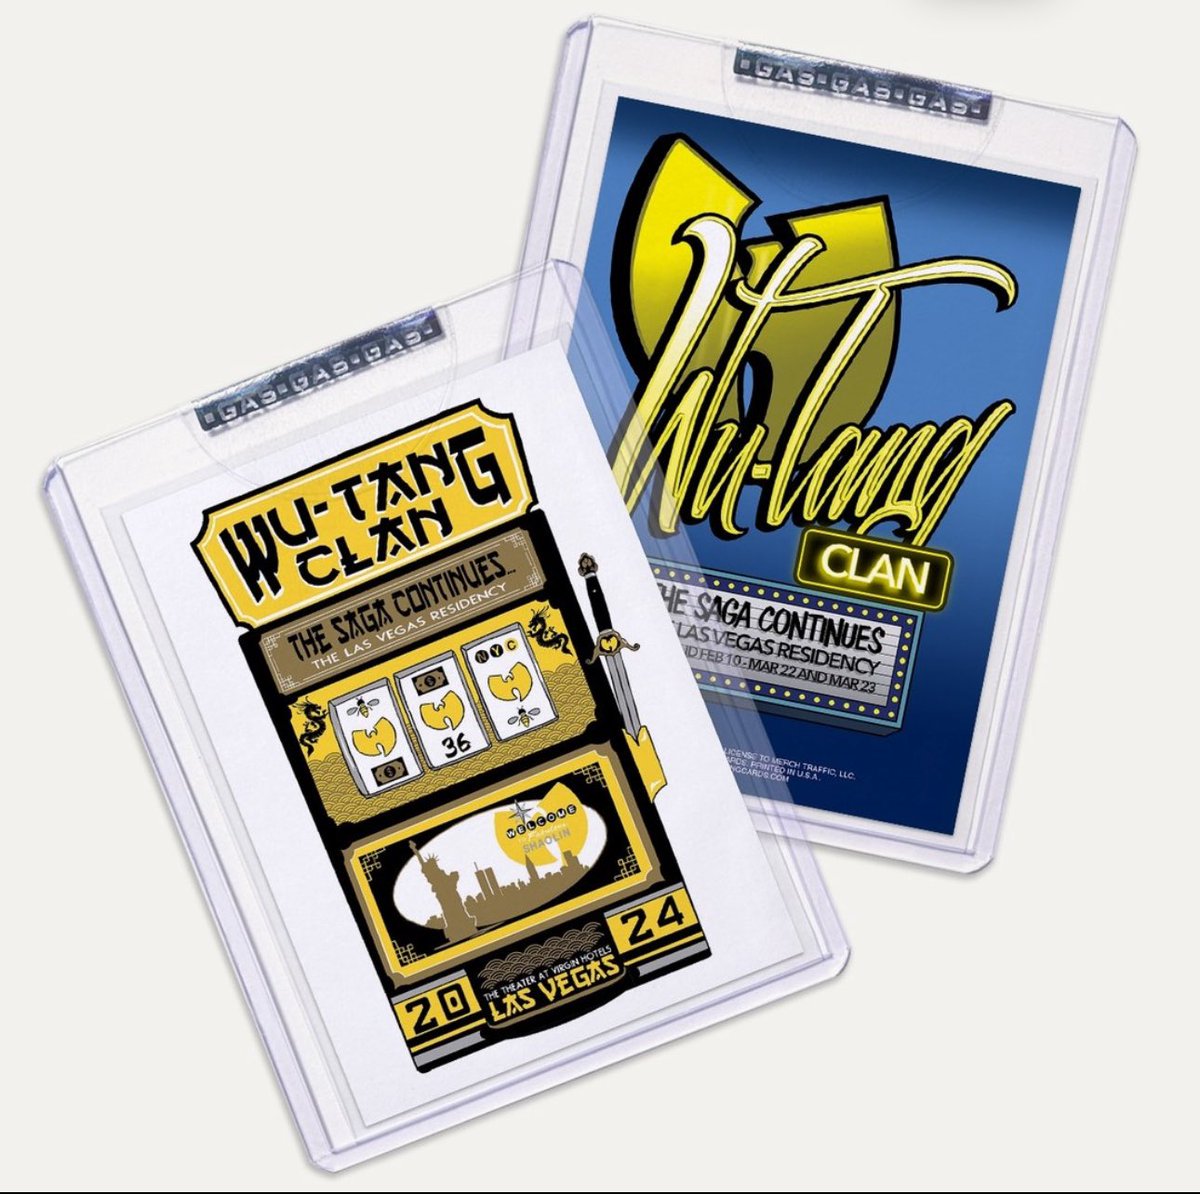 GAS is proud to present the official @wutangclan The Las Vegas Residency Trading Card, featuring the @collectionzz poster artwork. On sale in-person at each show, if you missed out on the February dates, they'll be available again on Friday, March 22nd and Saturday the 23rd.